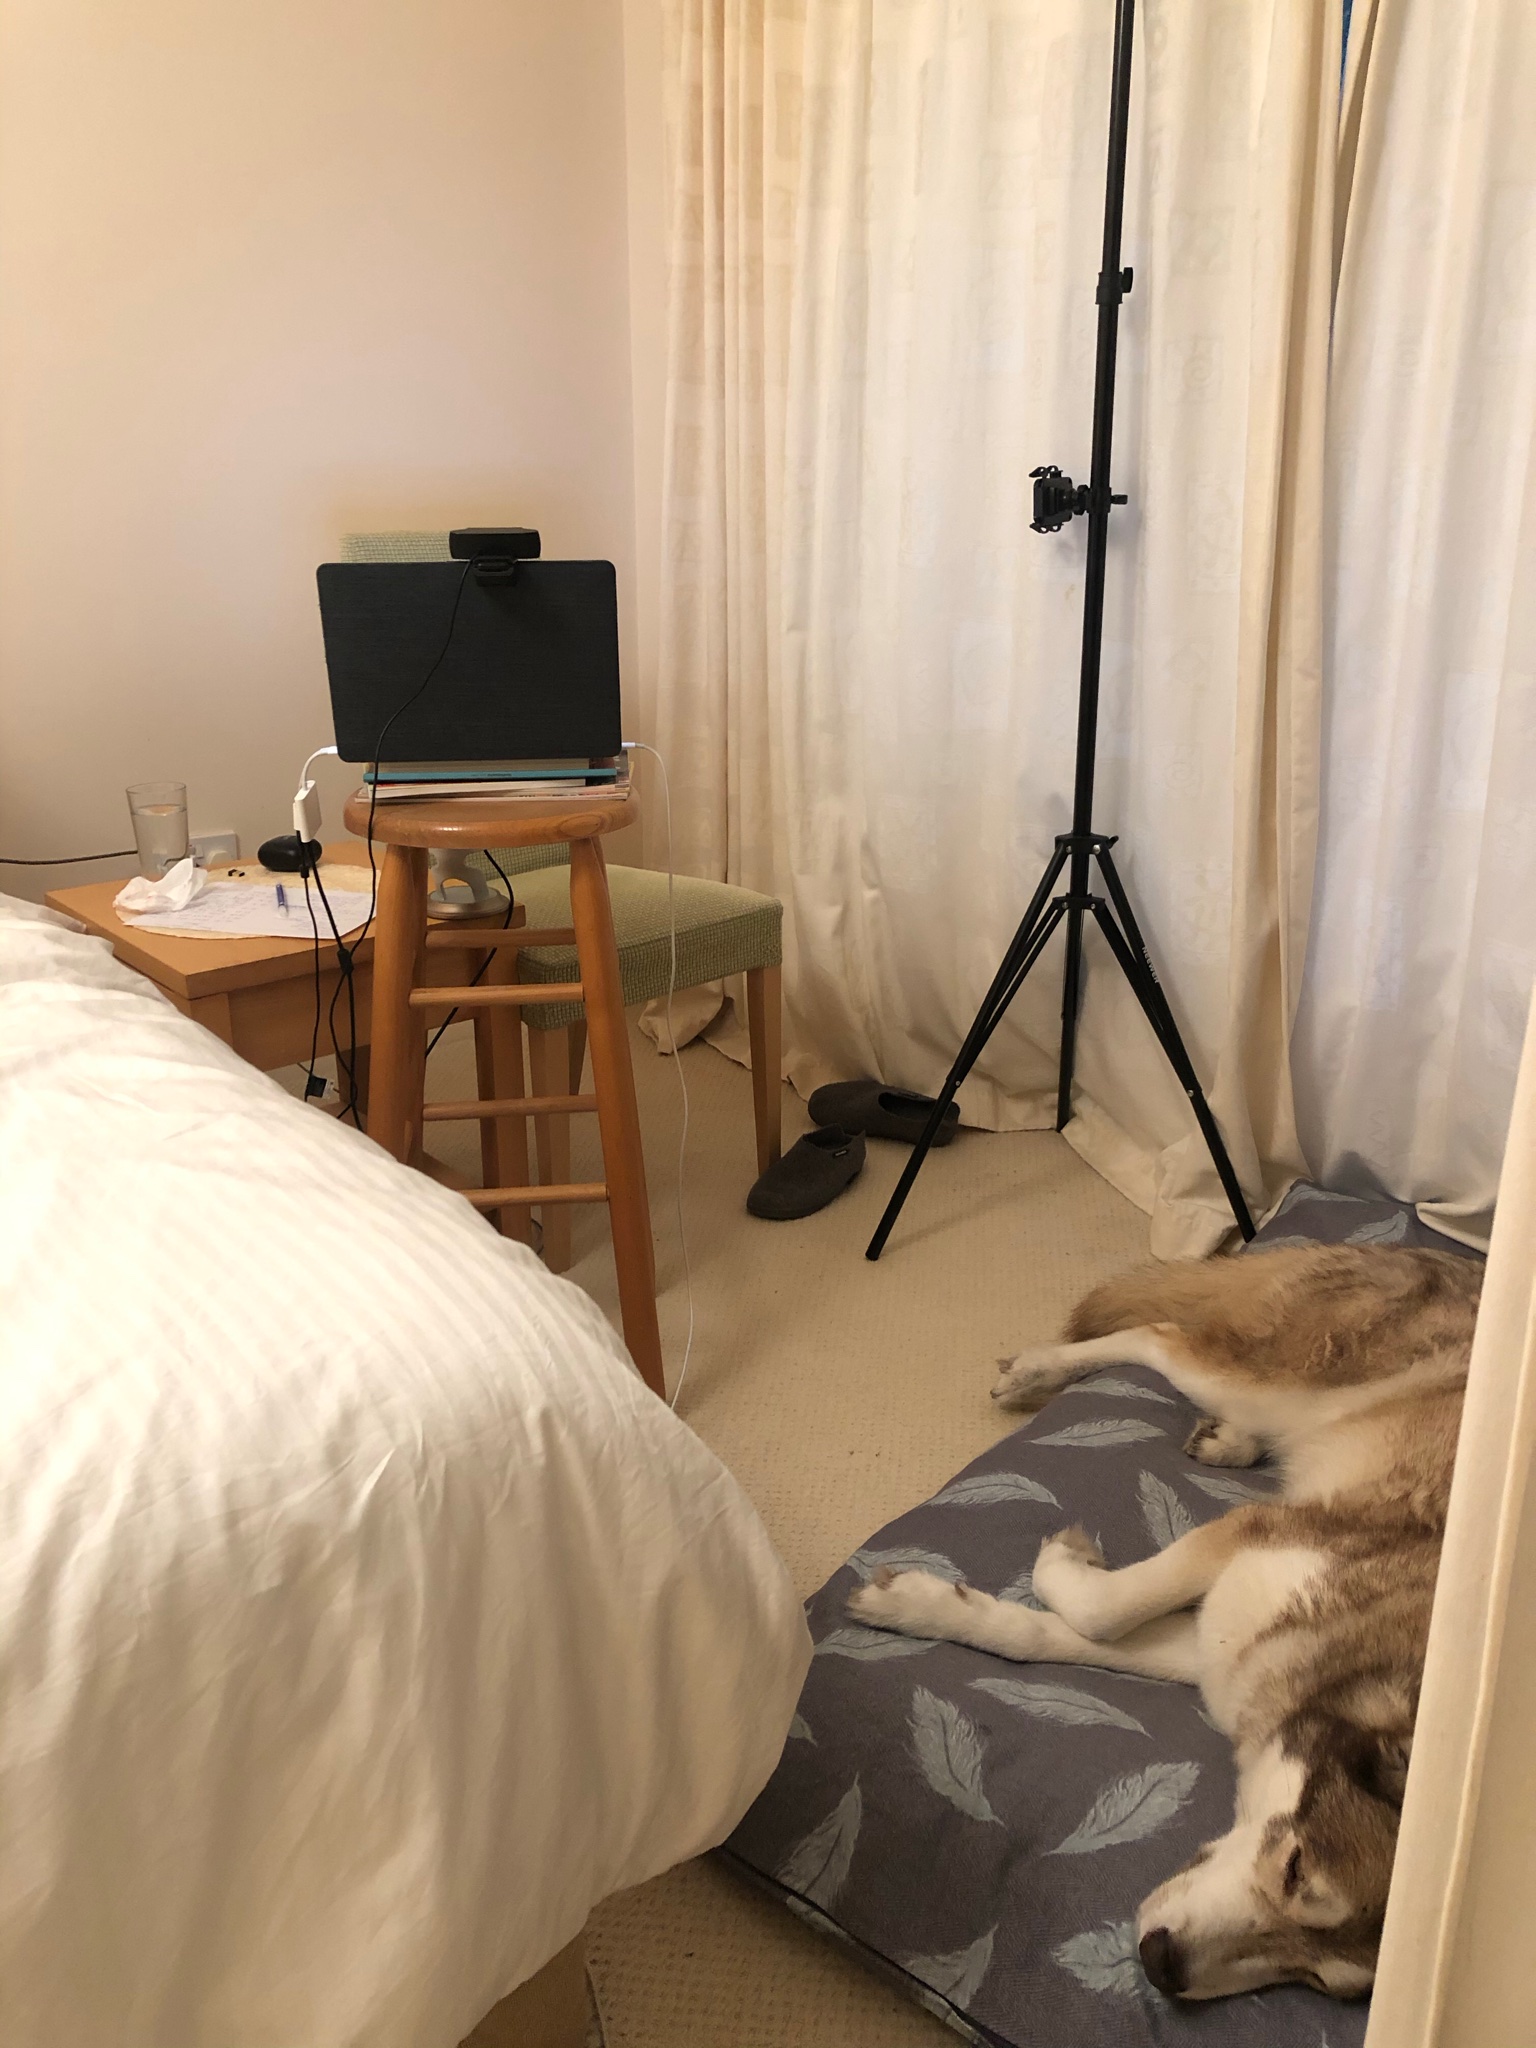 Bedroom with a dog in his bed on the floor and a laptop propped on a stool.